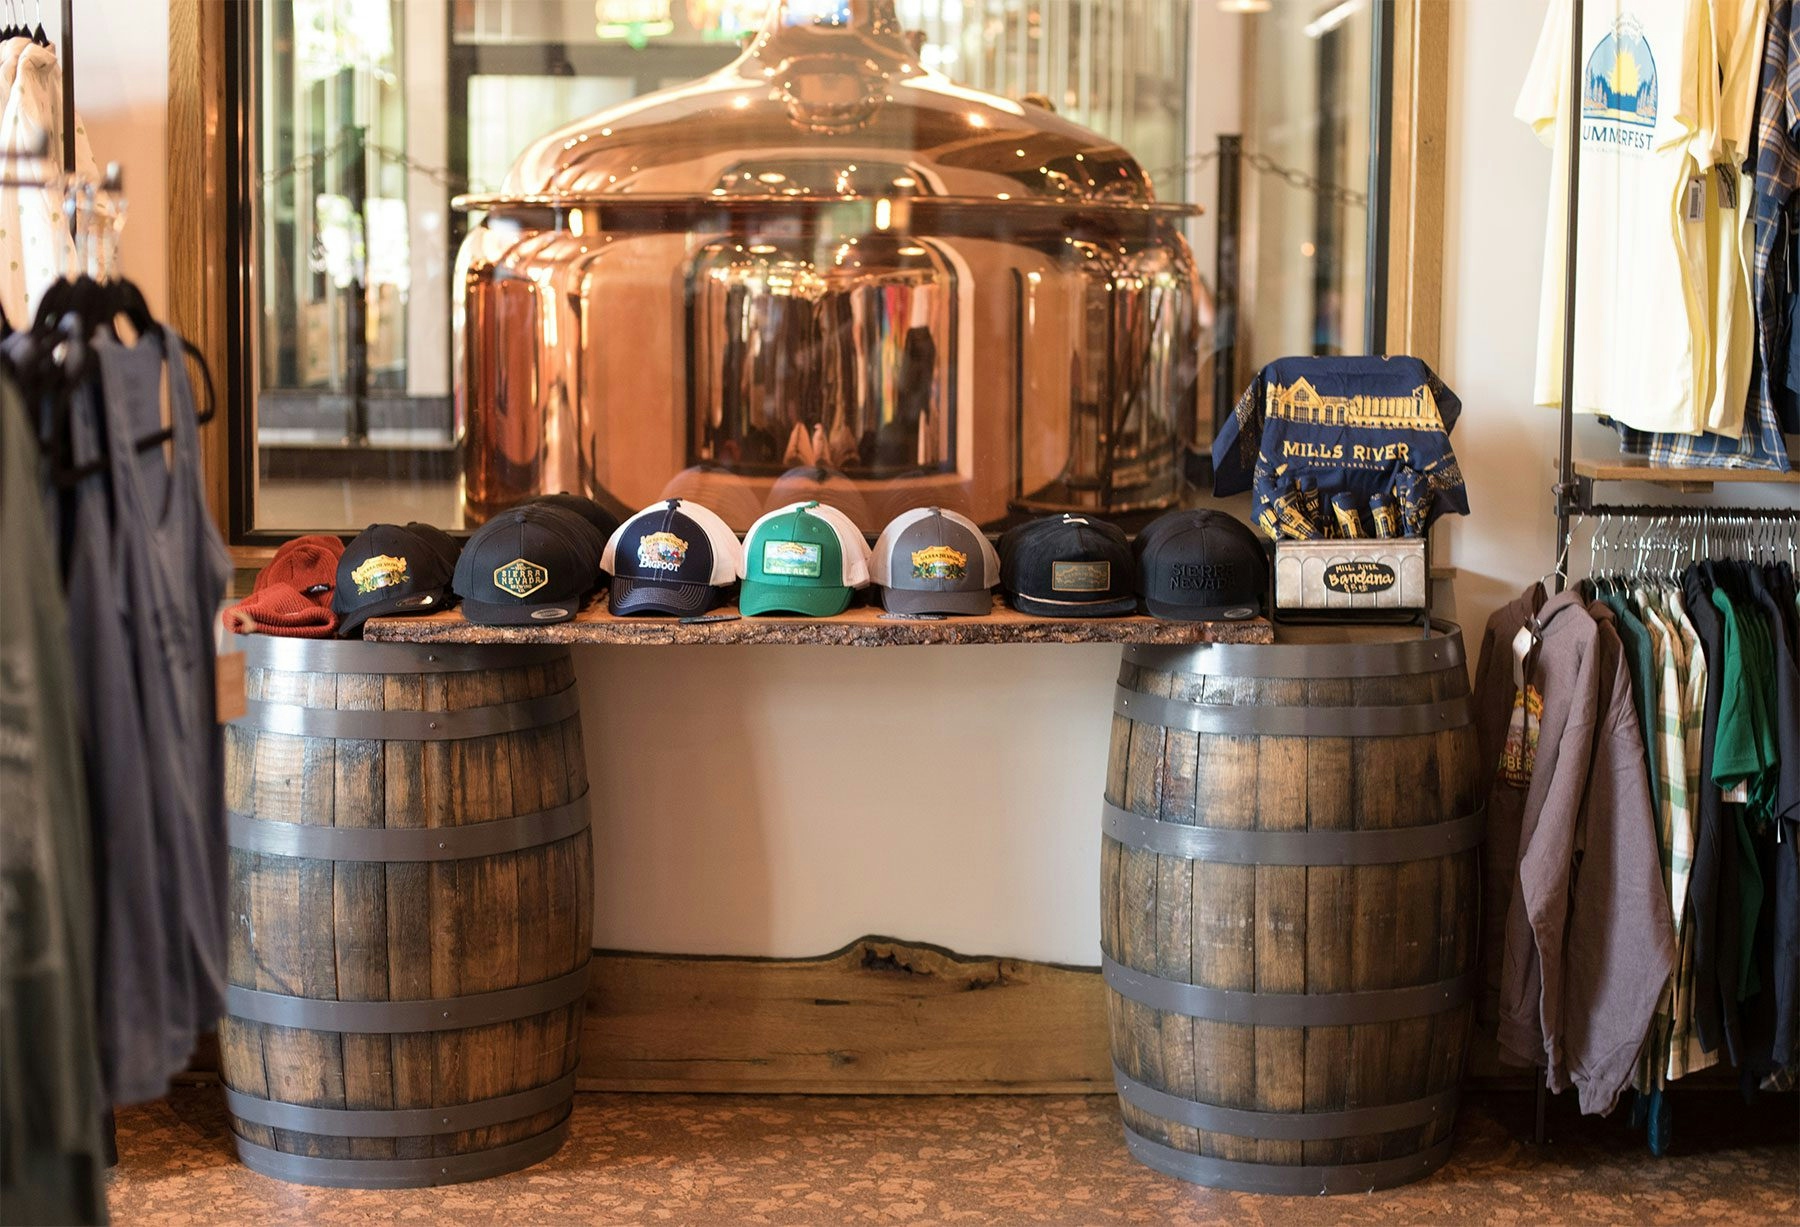 A table of hats inside the Sierra Nevada Brewing Co. gift shop